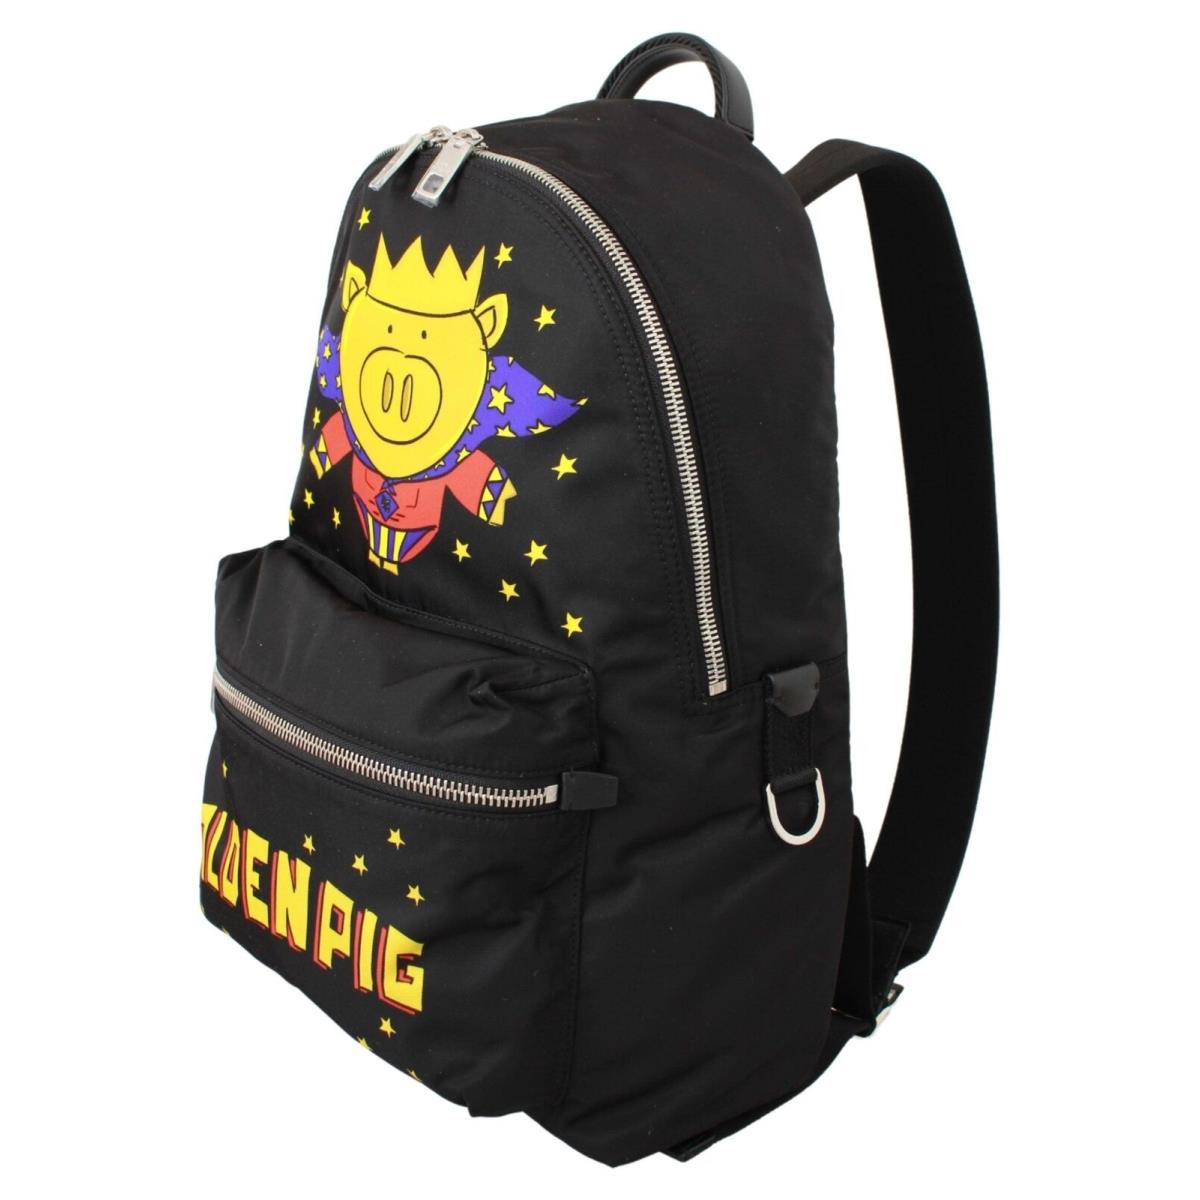 Dolce Gabbana Black Golden Pig of The Year School Backpack